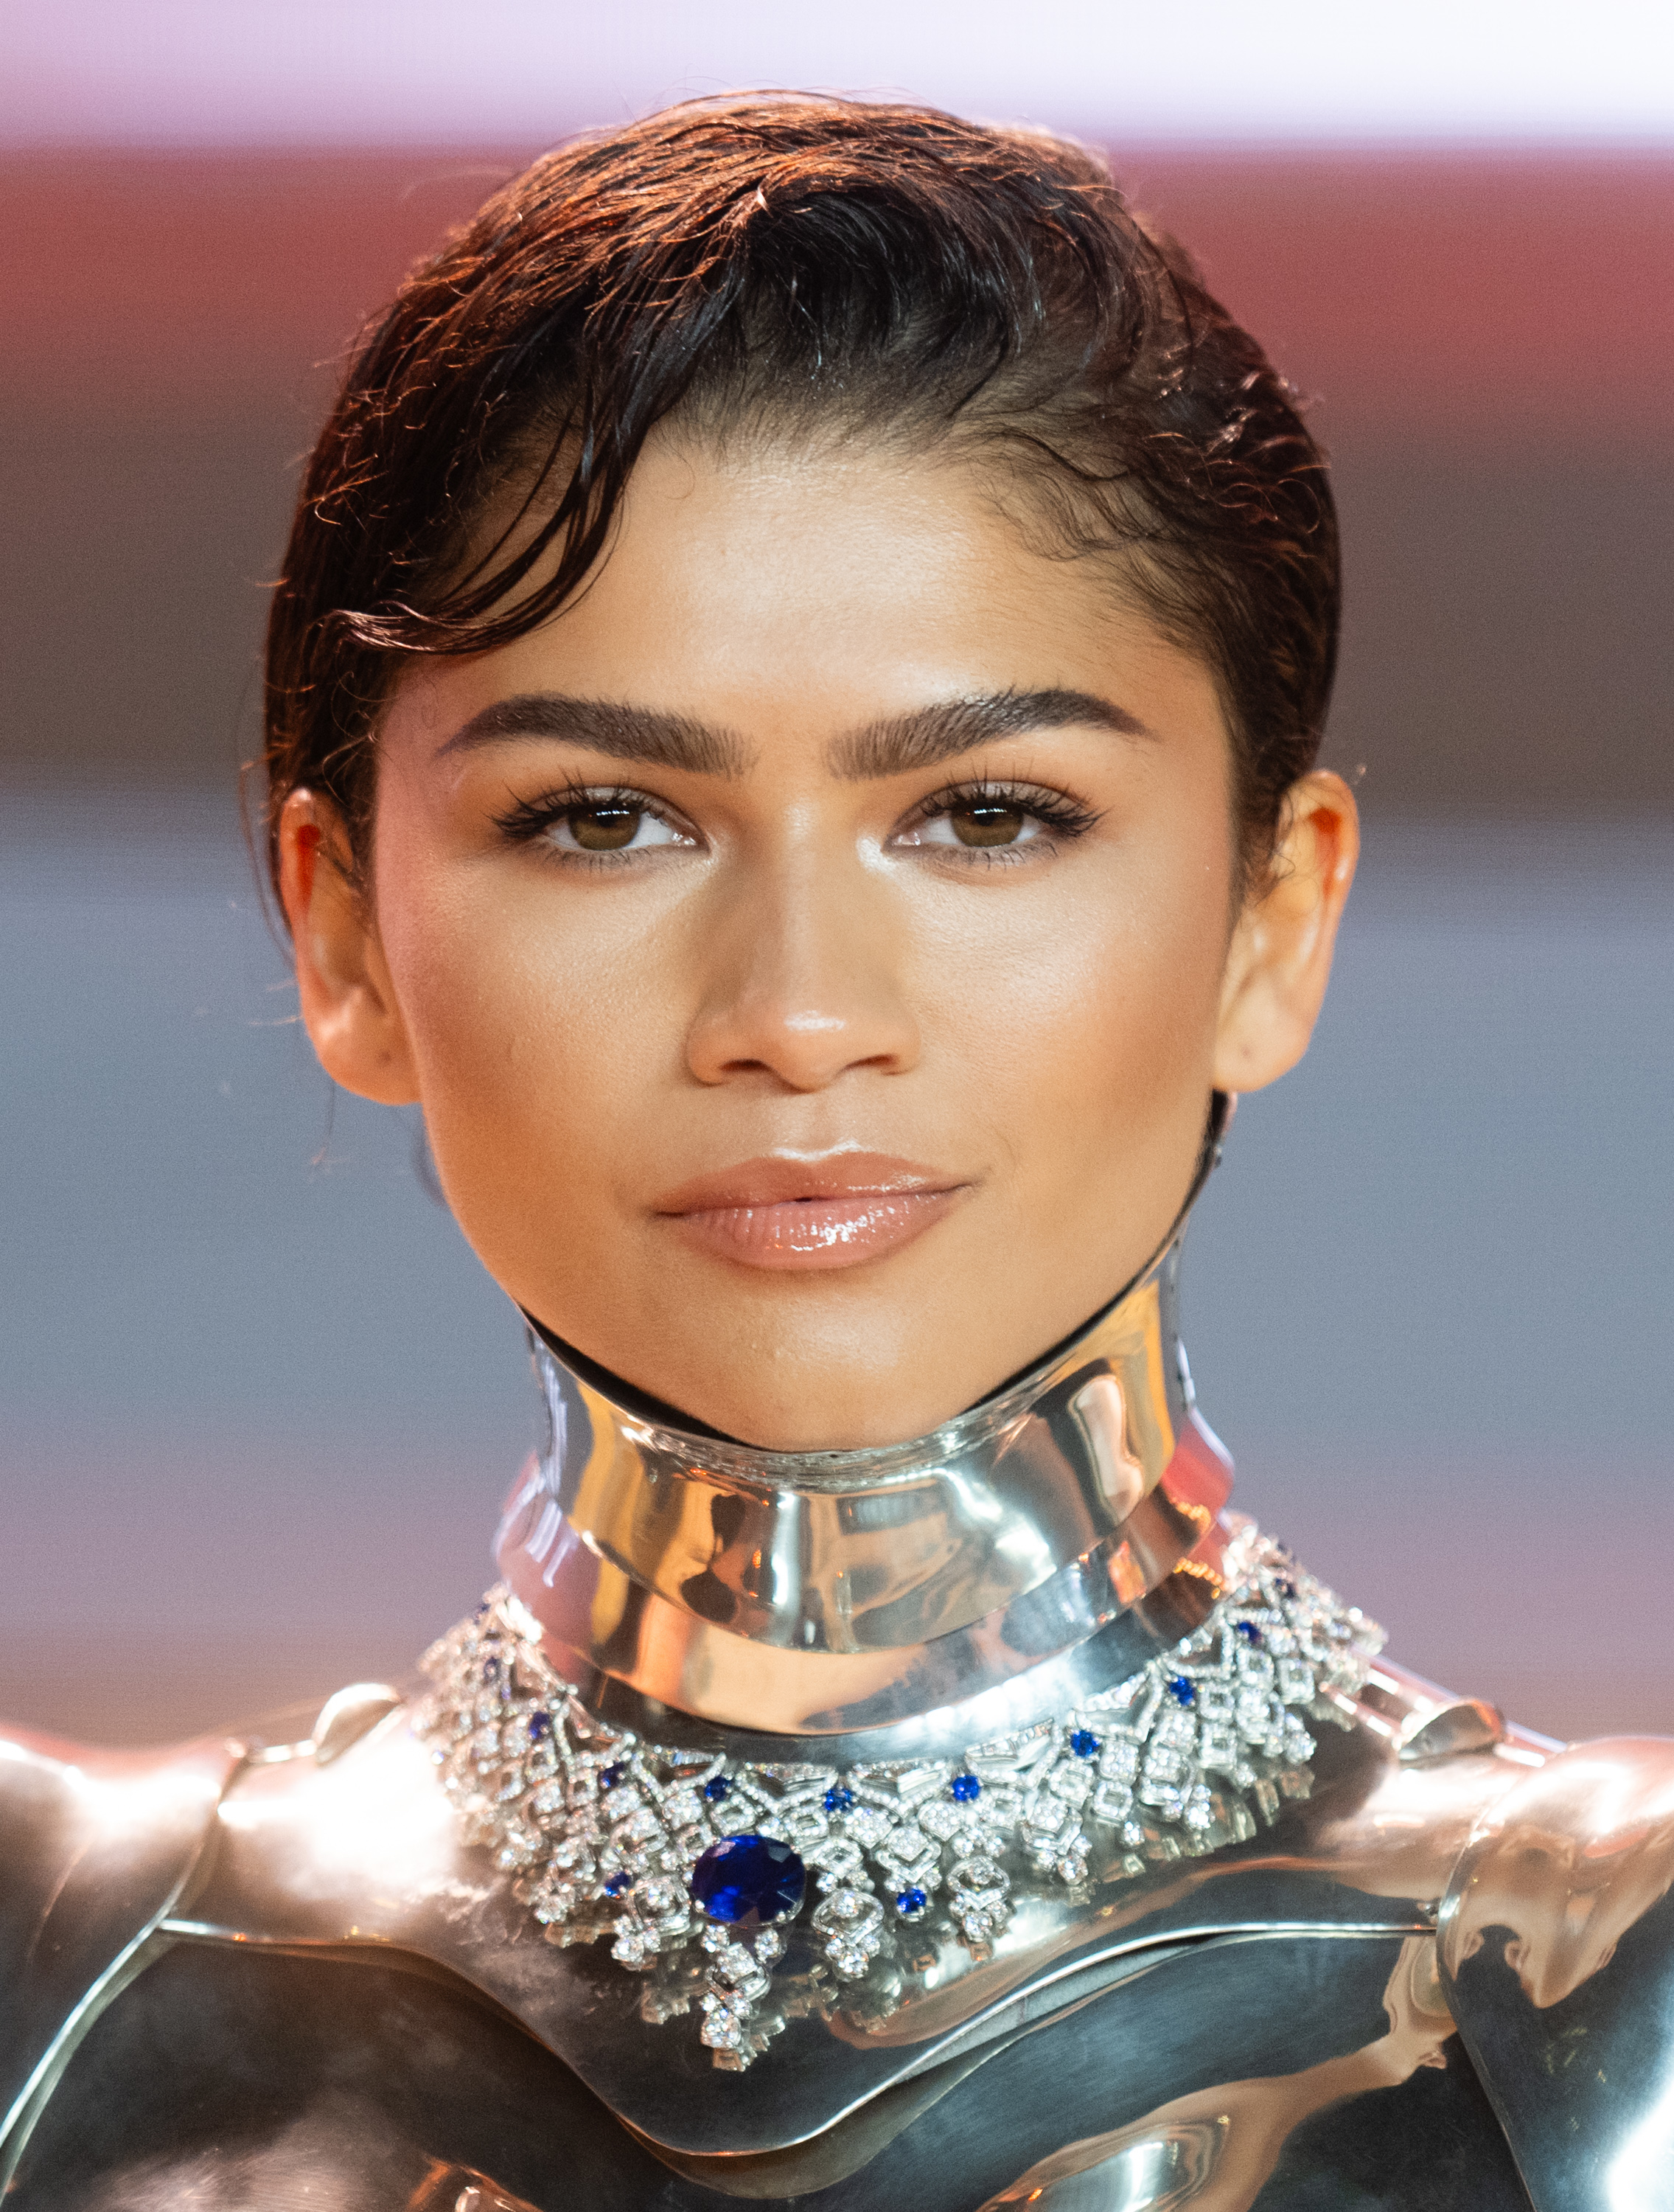 Close-up of Zendaya in a metallic outfit with a prominent jeweled necklace